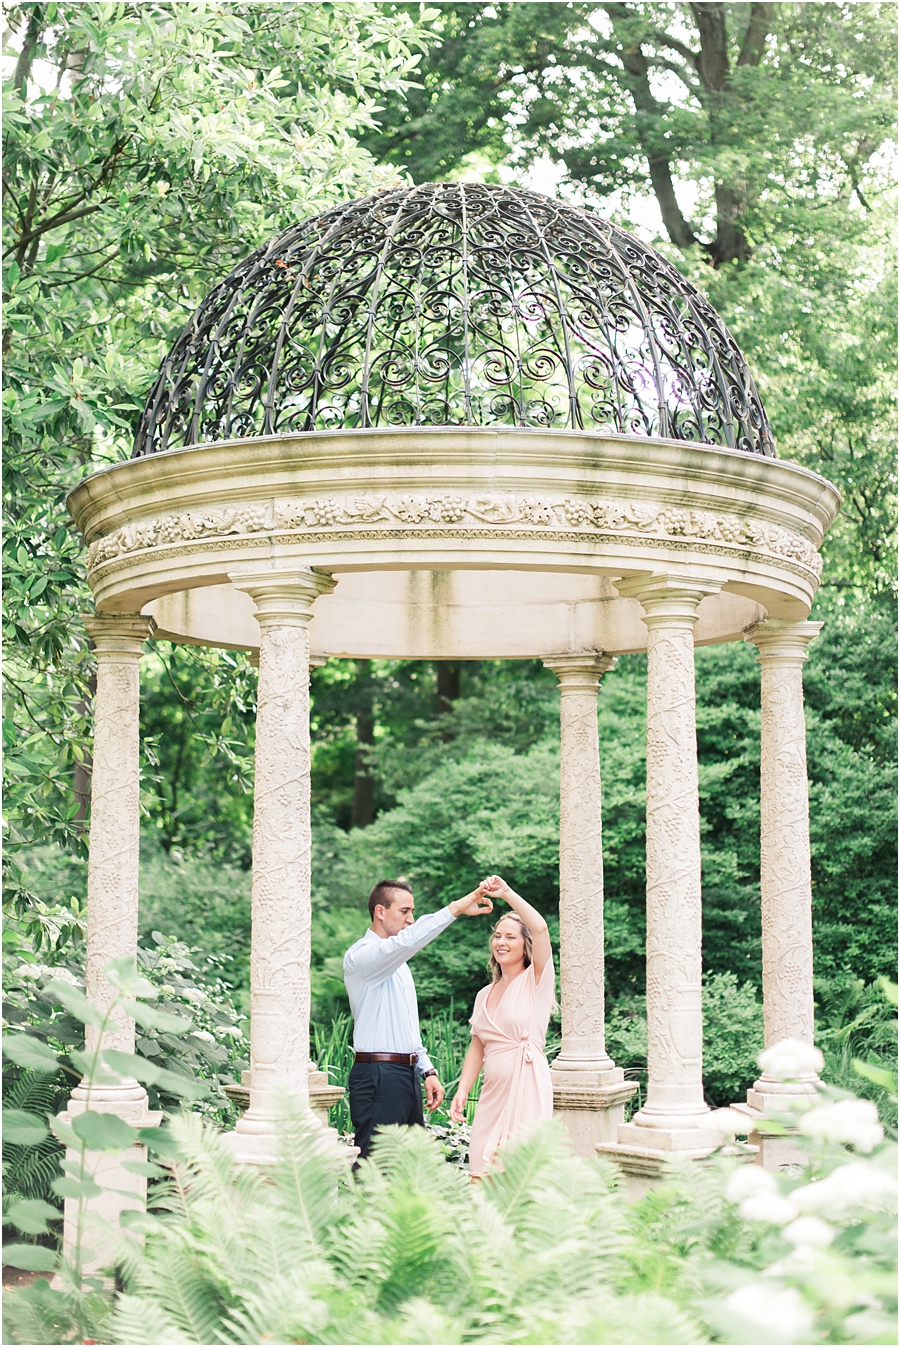 Longwood Gardens Engagement Session in Kennett Square, Pennsylvania by Film Photographer Hillary Muelleck